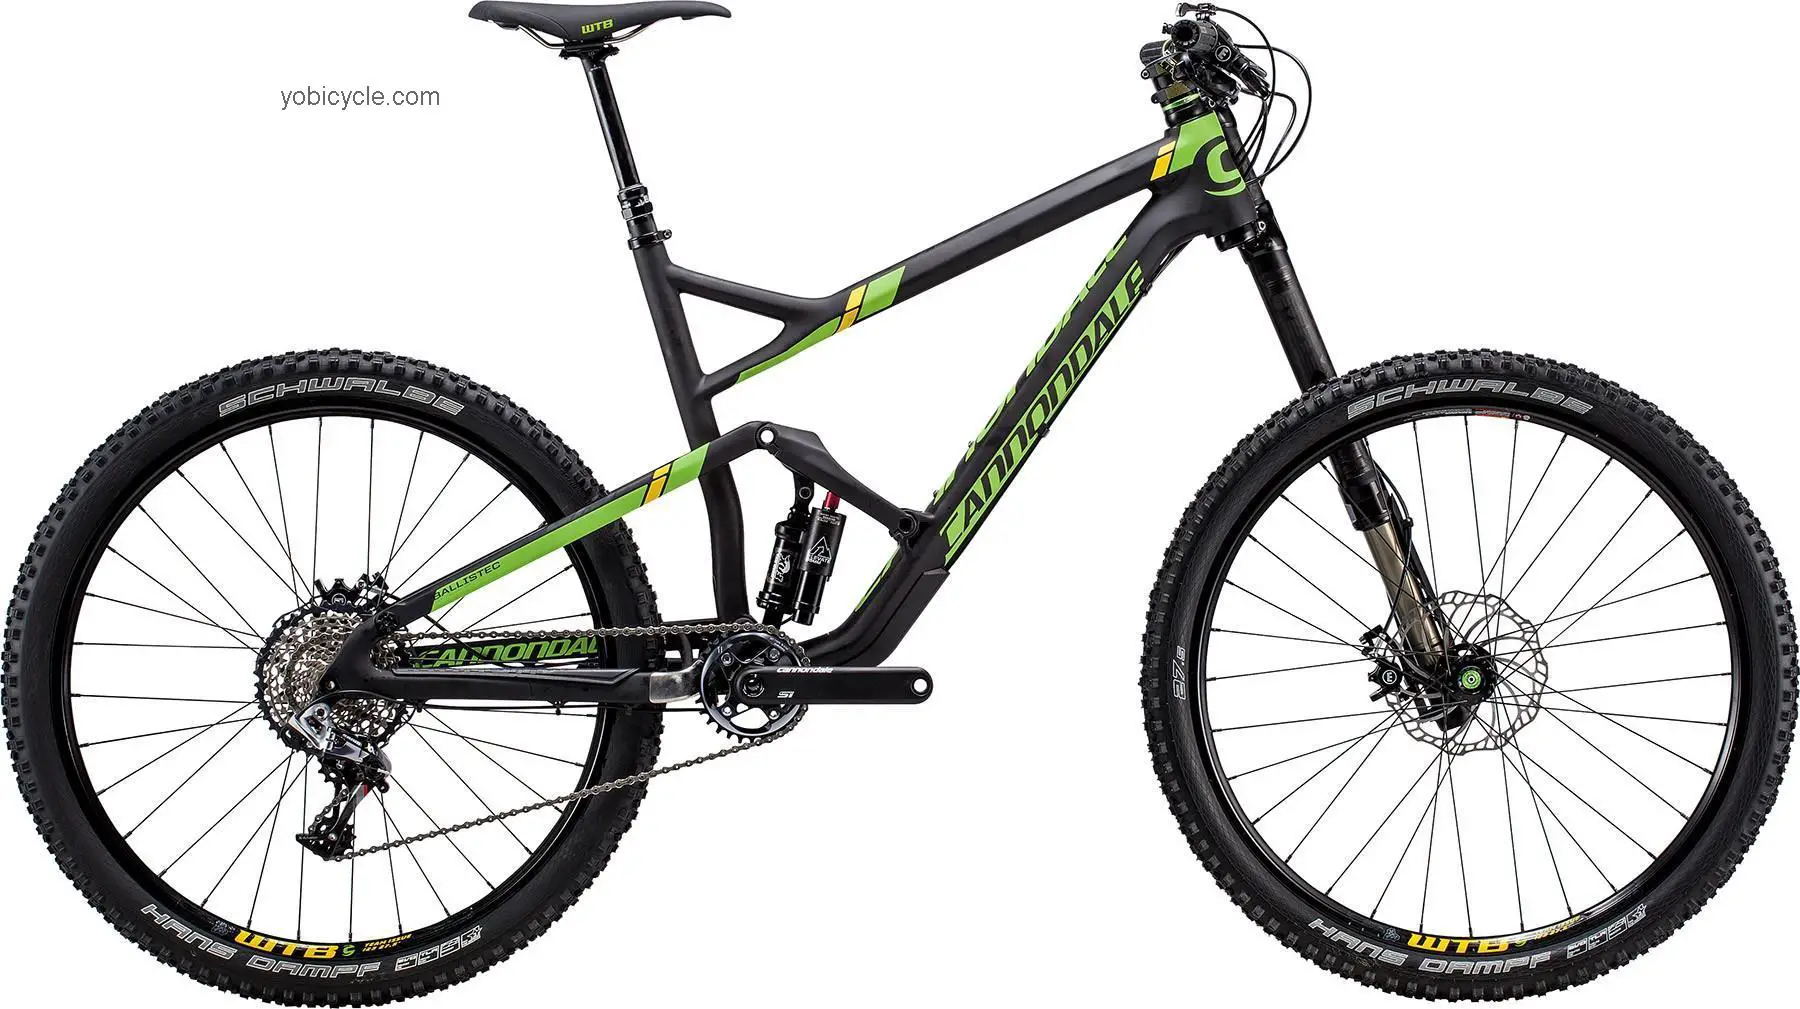 Cannondale JEKYLL CARBON TEAM 2015 comparison online with competitors